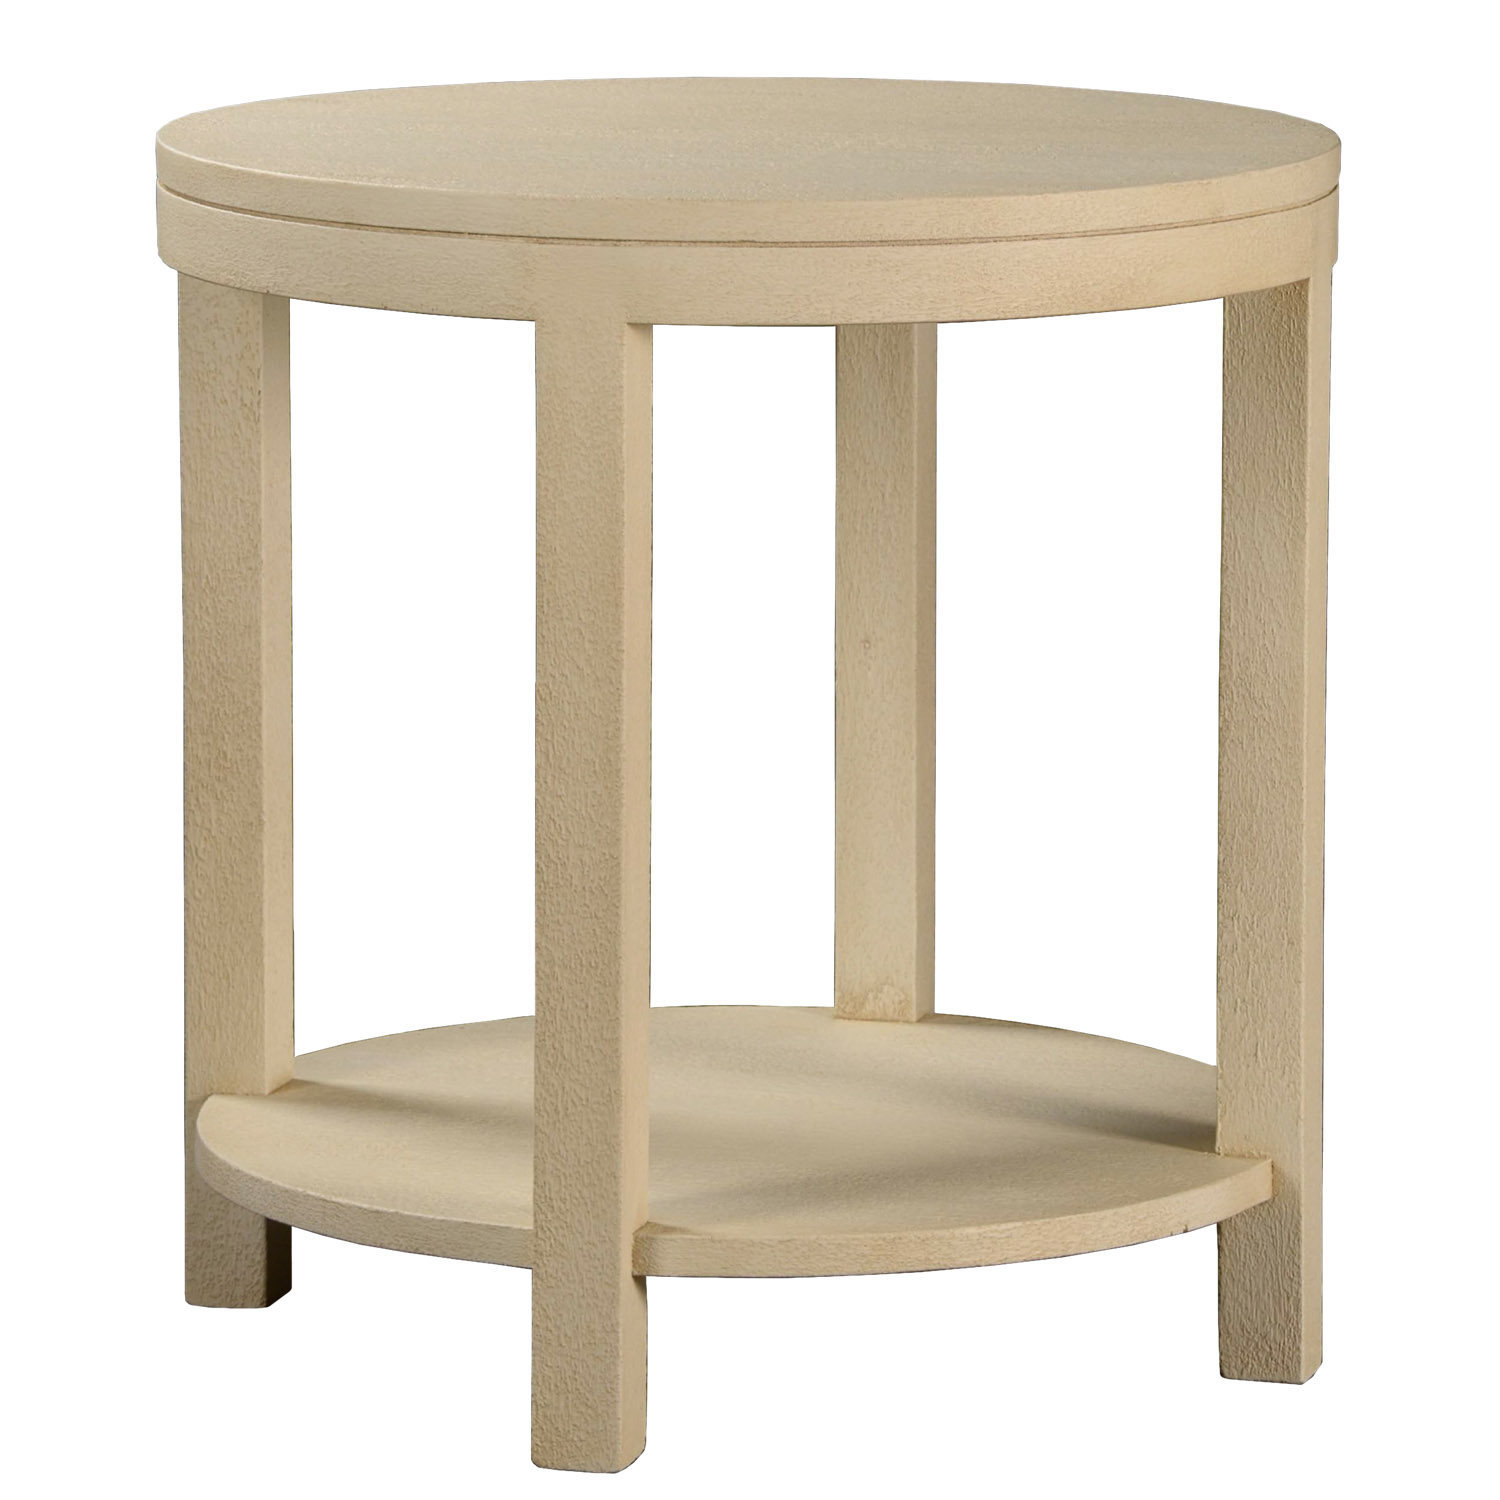 Perth transitional painted round modern side or end table with bottom shelf by Woodland furniture in Idaho falls